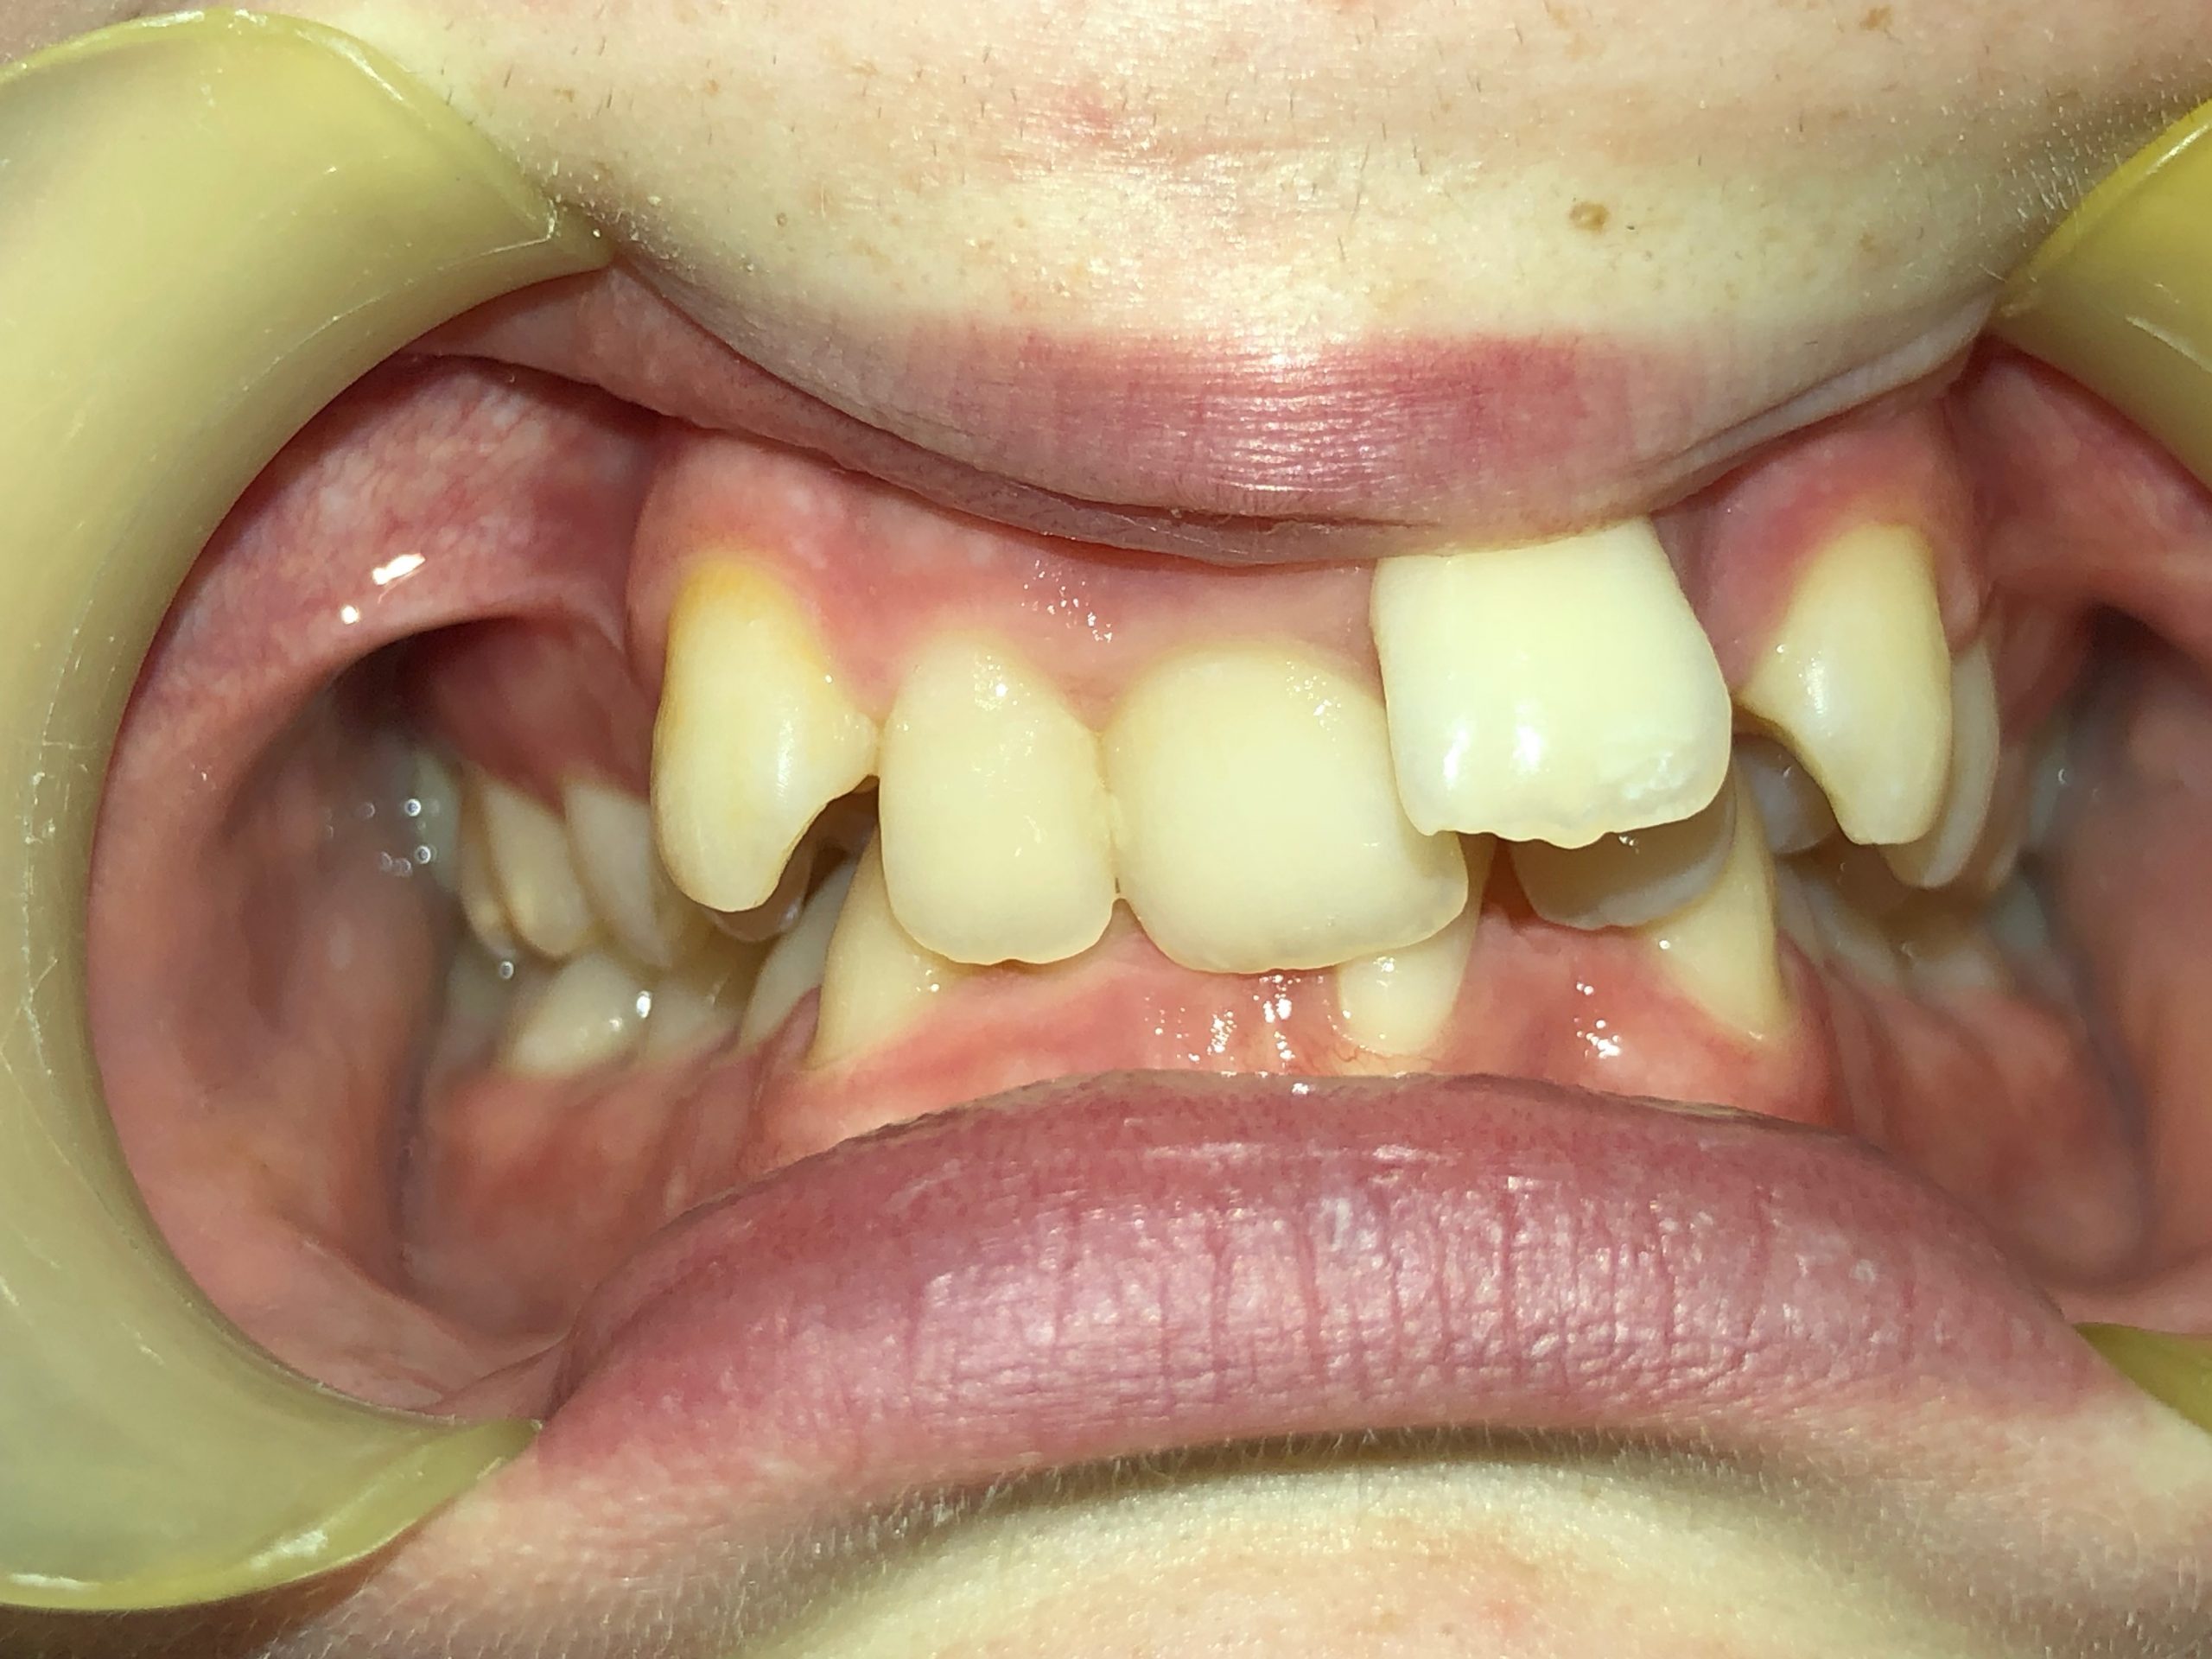 Orthodontics - Upper and lower lip appliances after 5 months - Example 3